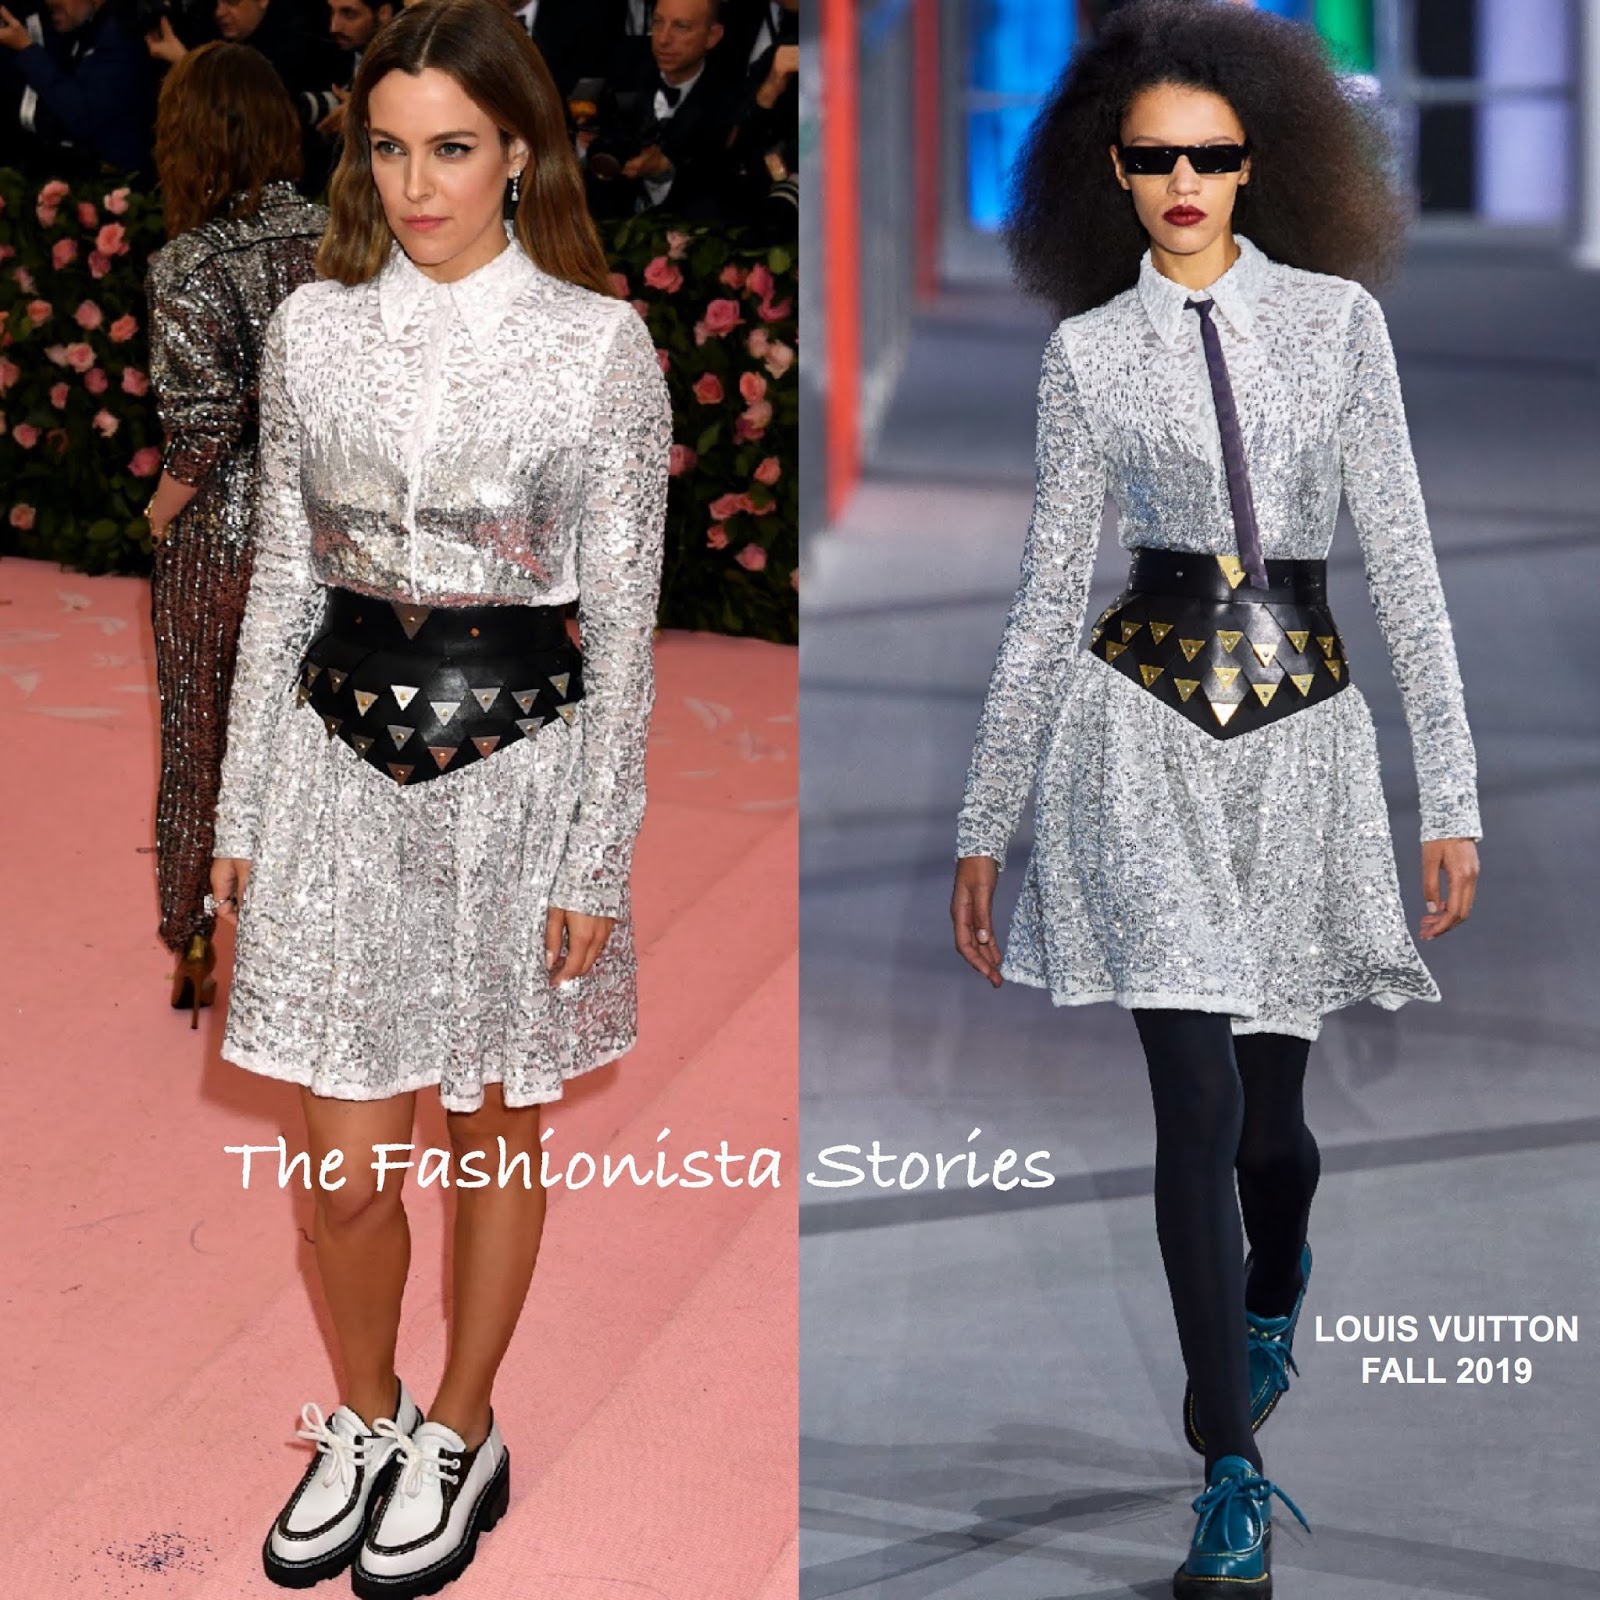 Jennifer Connelly's Louis Vuitton Belted Dress by Nicolas